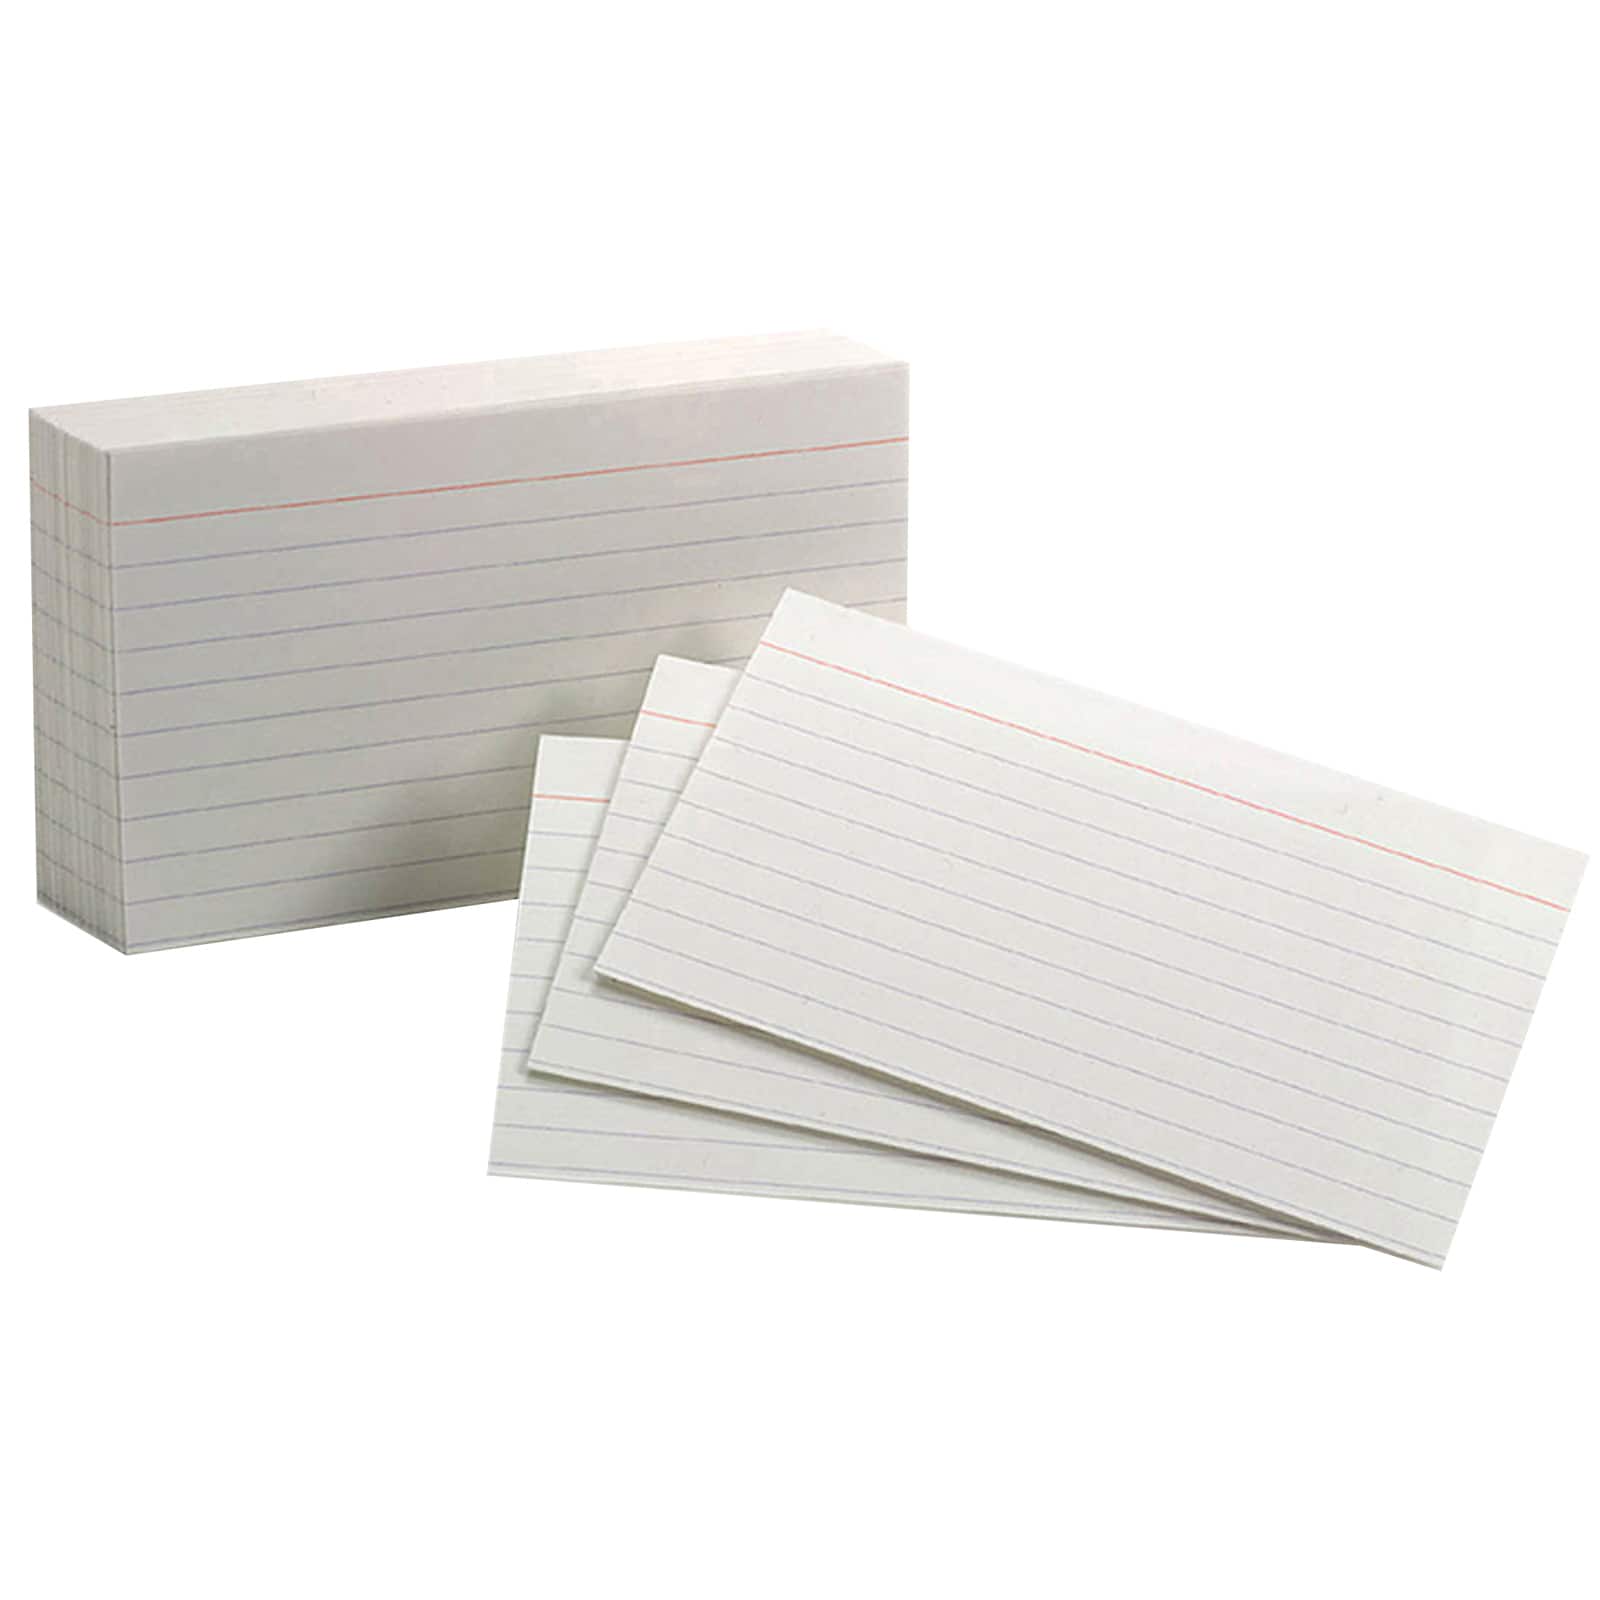  200-Pack Cardstock Paper 4x6 In, 110lb Thick, Heavyweight  Card Stock Blank Index Cards For Flashcards, Recipe Cards, Save The Date,  DIY Postcards, Party Invitations